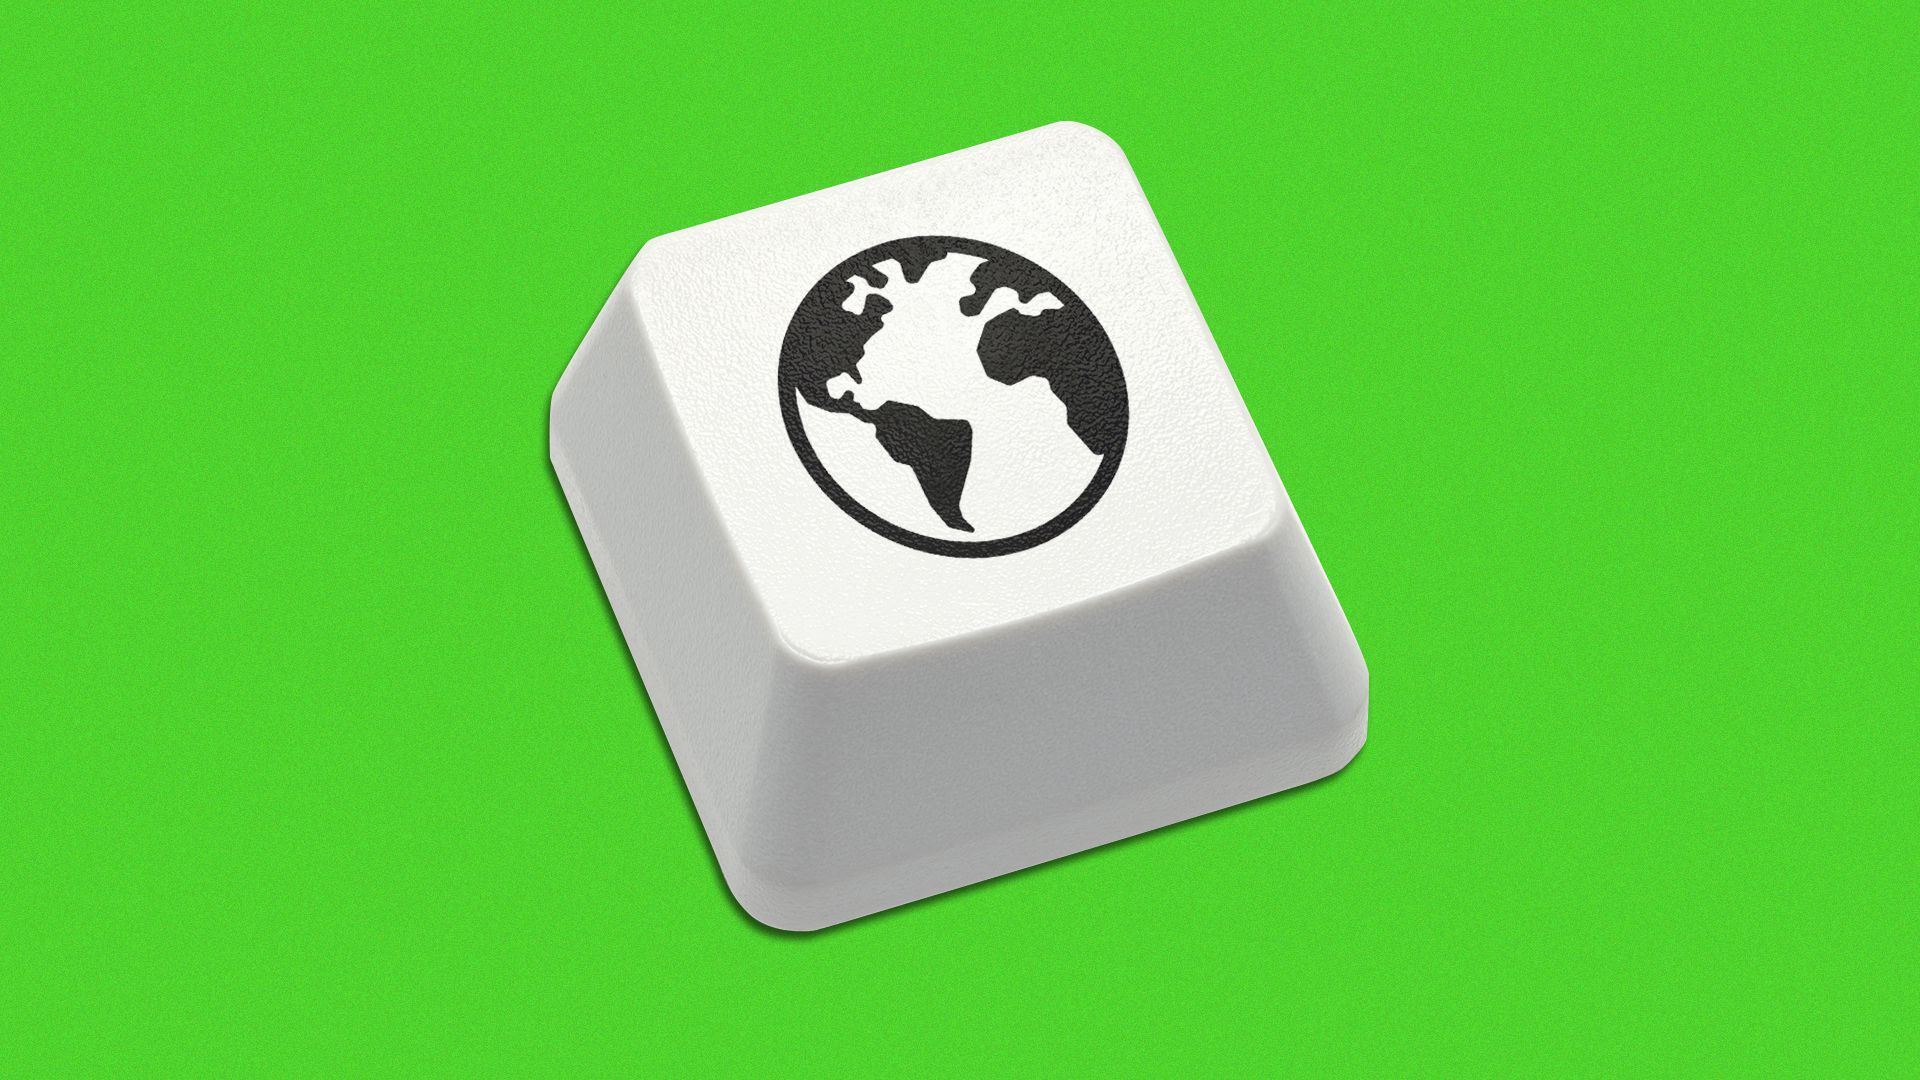 Illustration of a keyboard key with a globe on top.